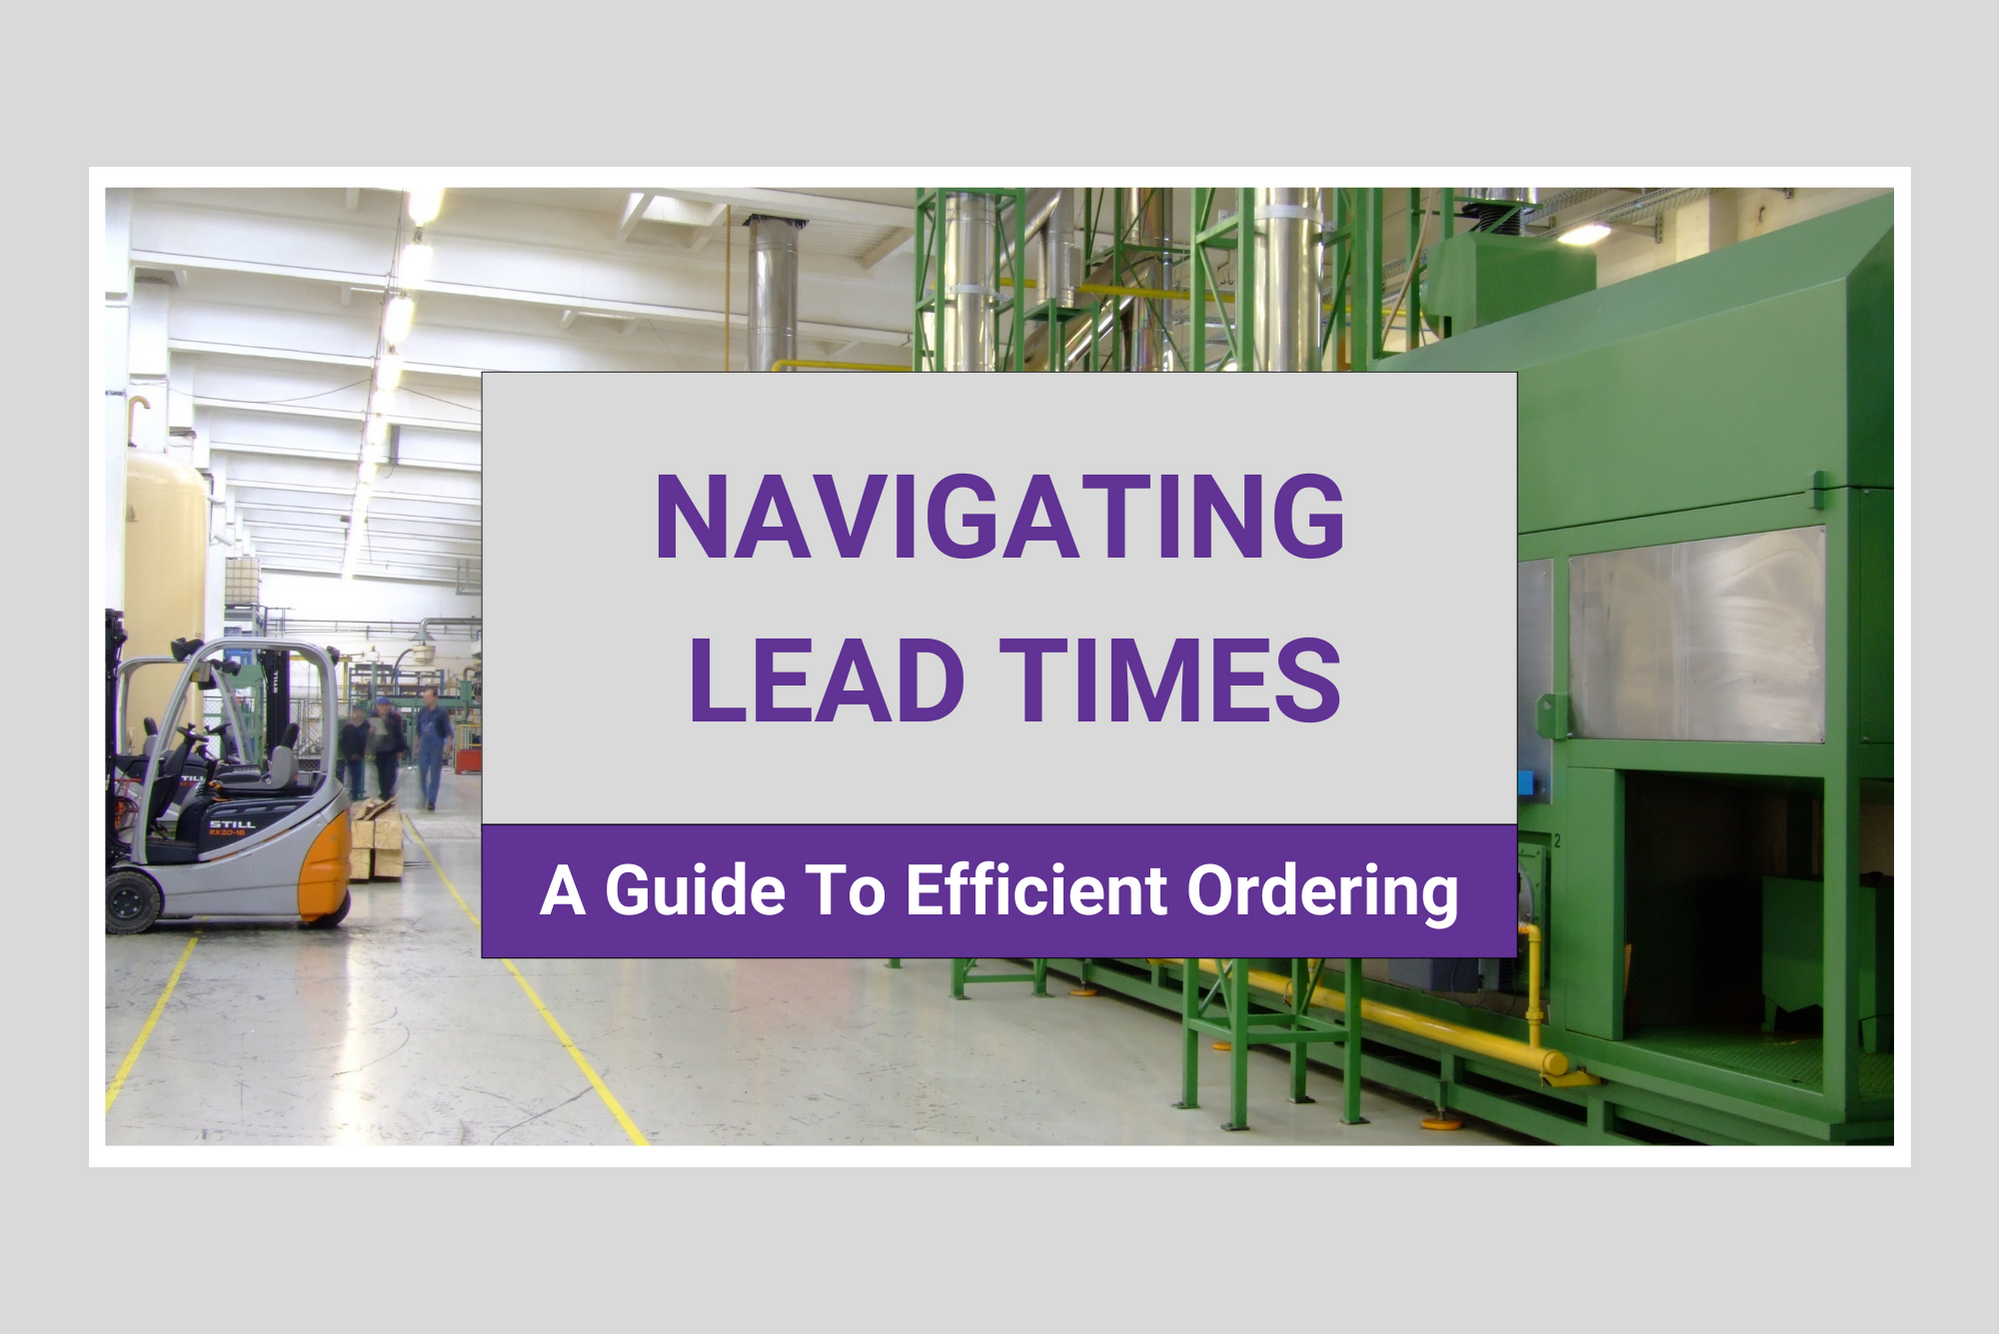 Placing your order is more than just clicking that checkout button. Here are the 3 main factors to consider when navigating lead times for your packaging order: